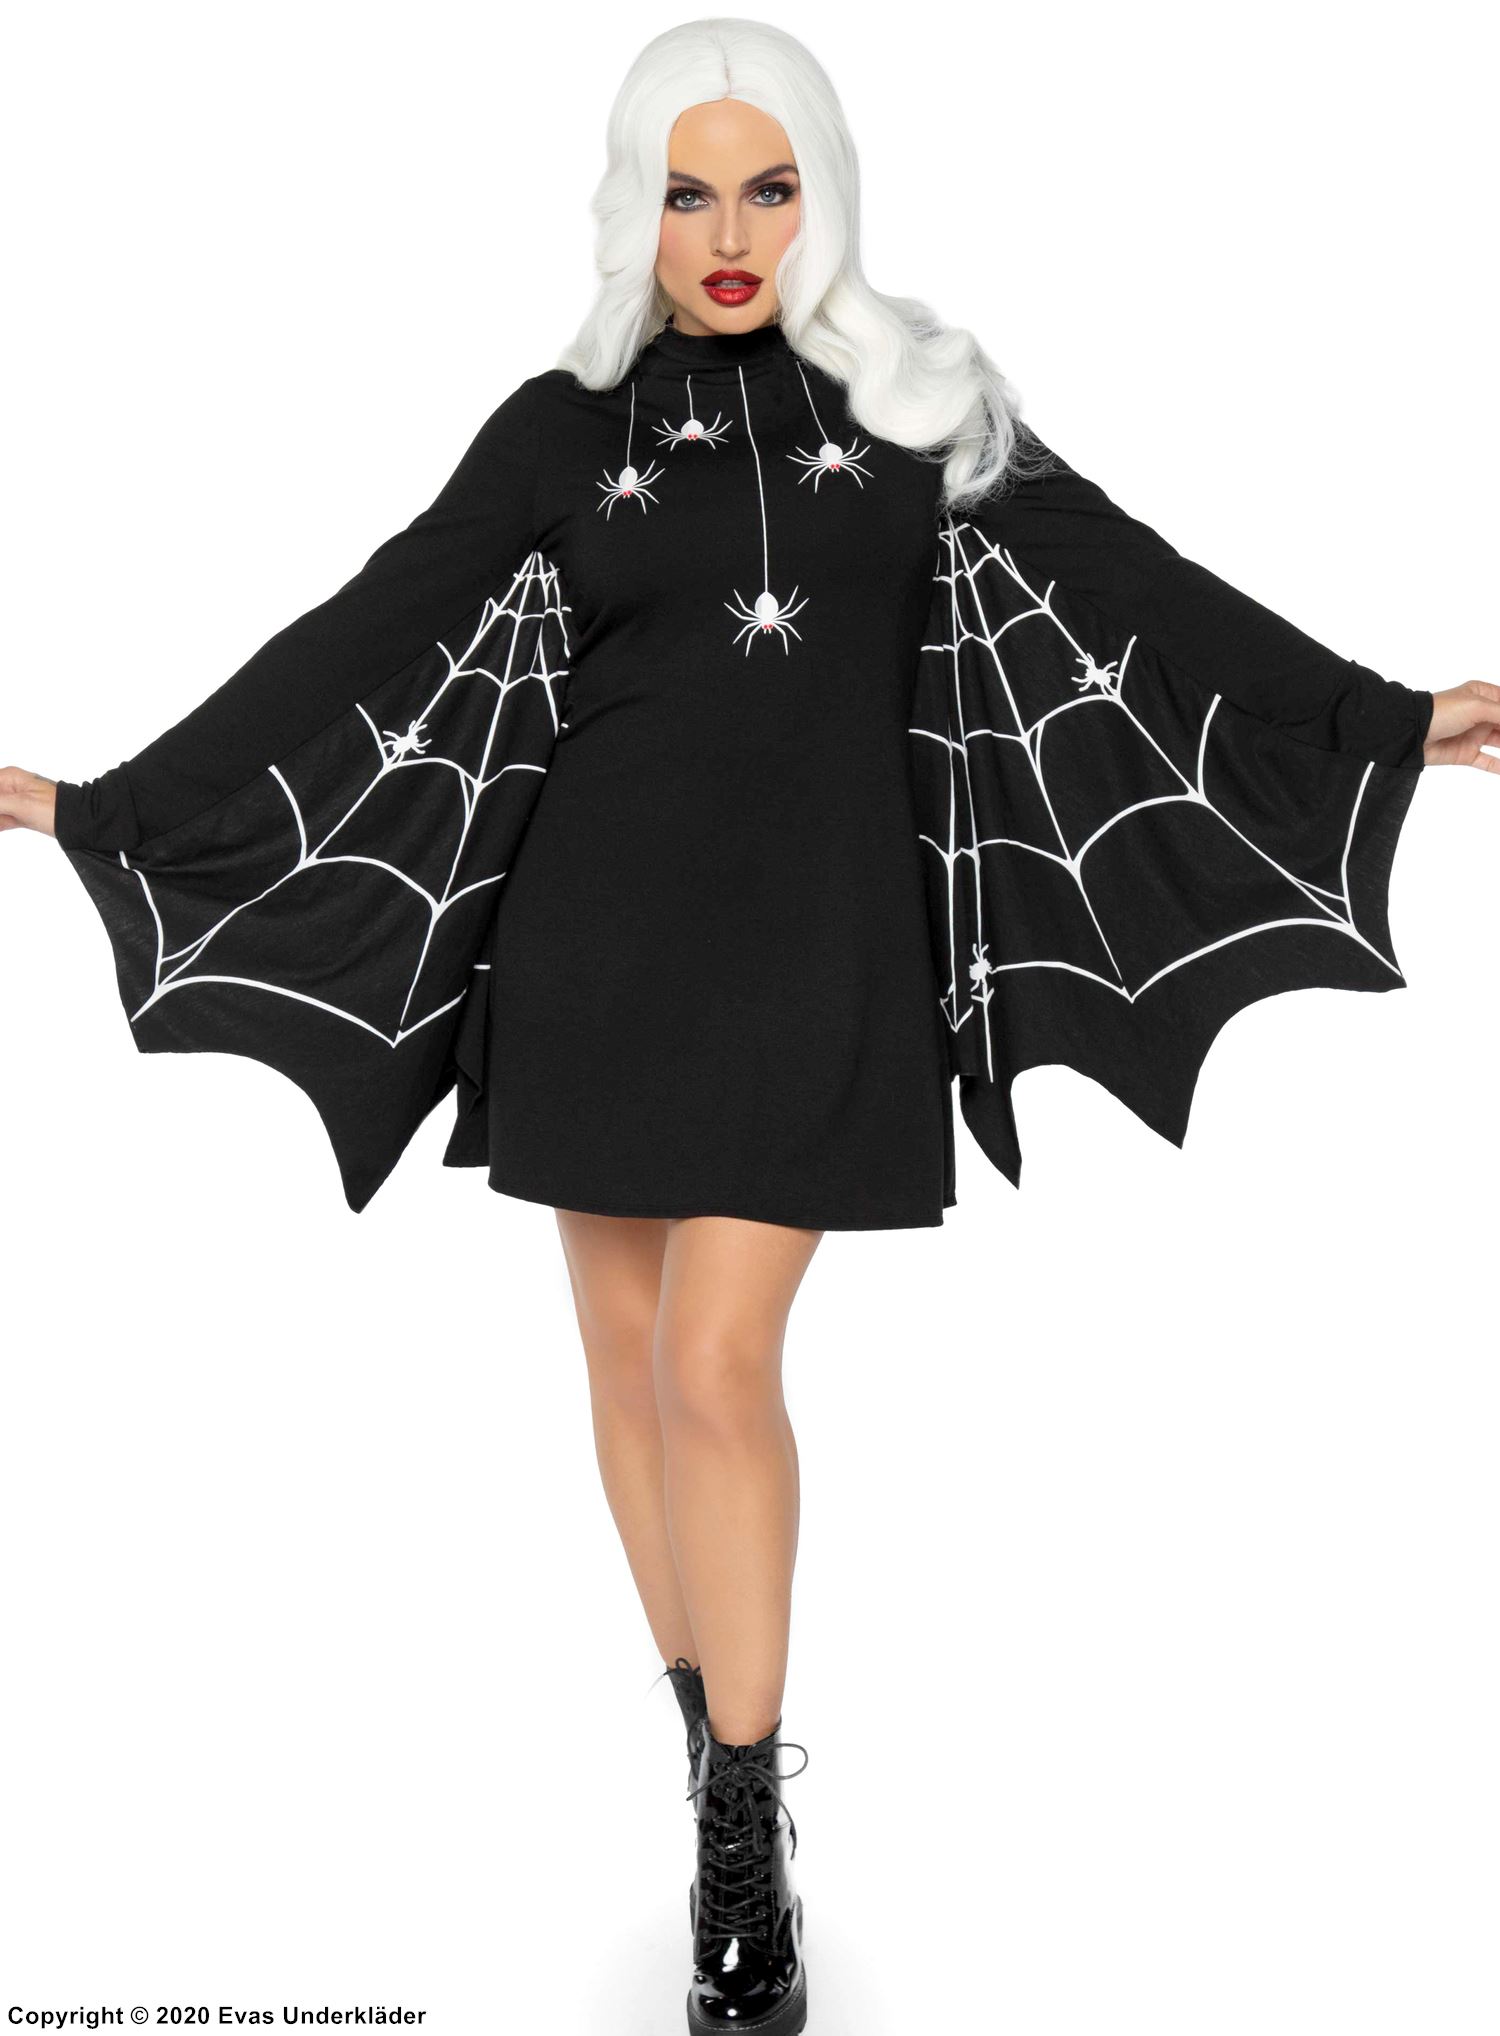 Costume dress, long sleeves, spider web